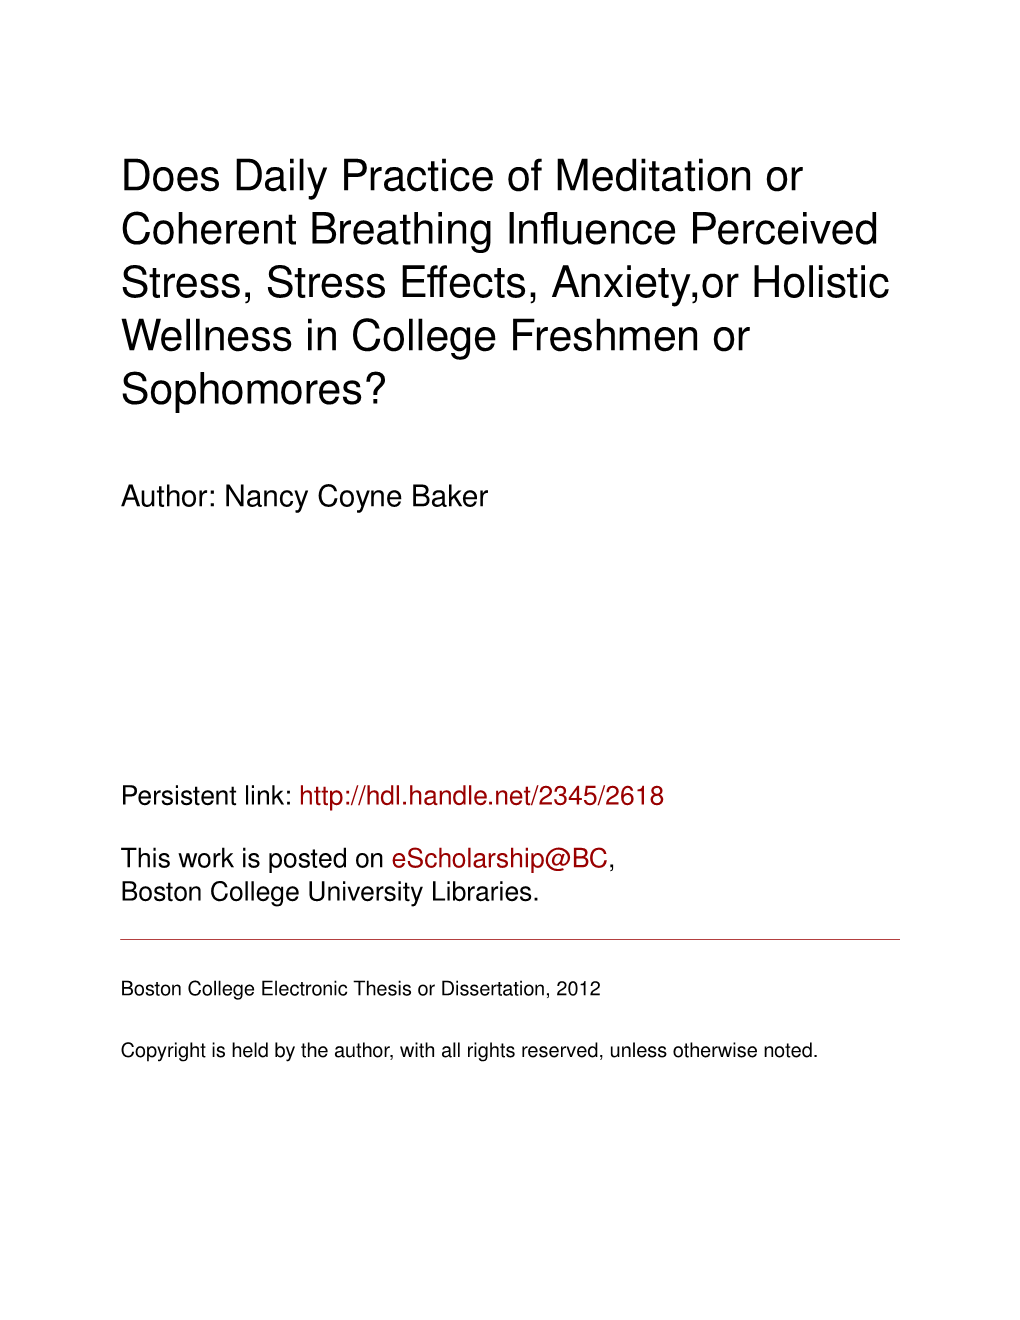 Does Daily Practice of Meditation Or Coherent Breathing Influence Perceived Stress, Anxiety Or Perceived Holistic Wellness in College Freshmen and Sophomores?